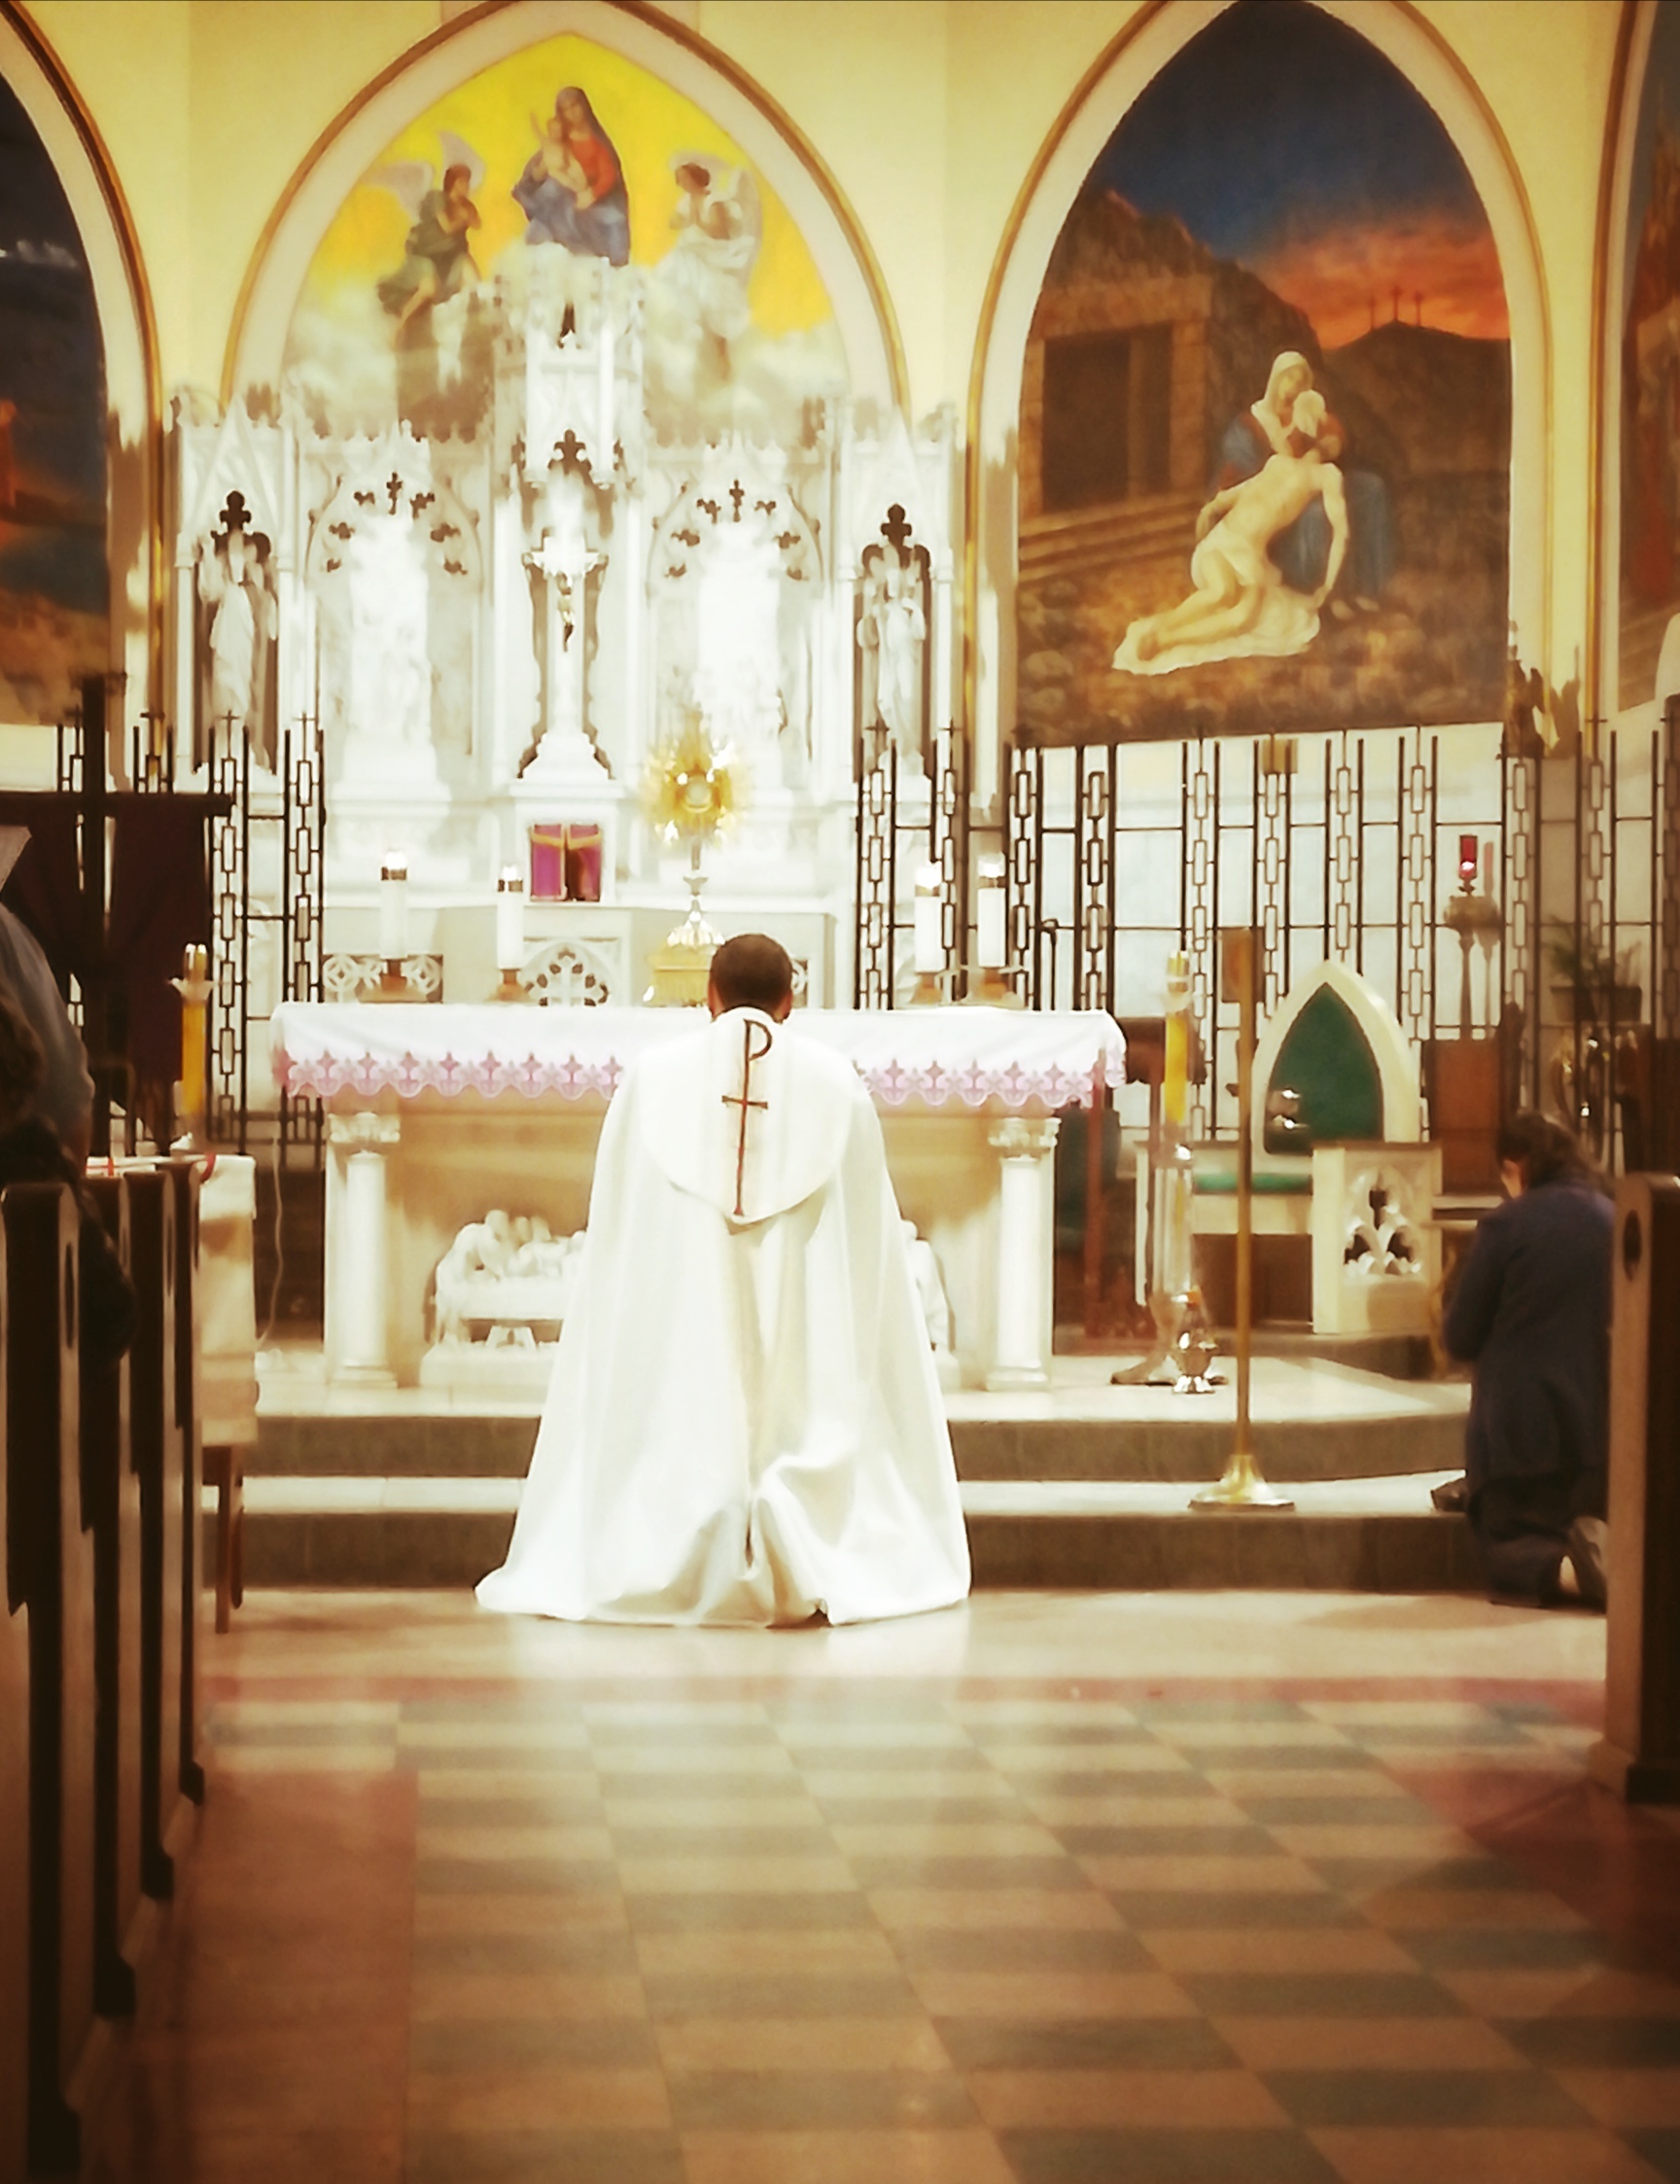 A priest kneeling down in front of the altar.